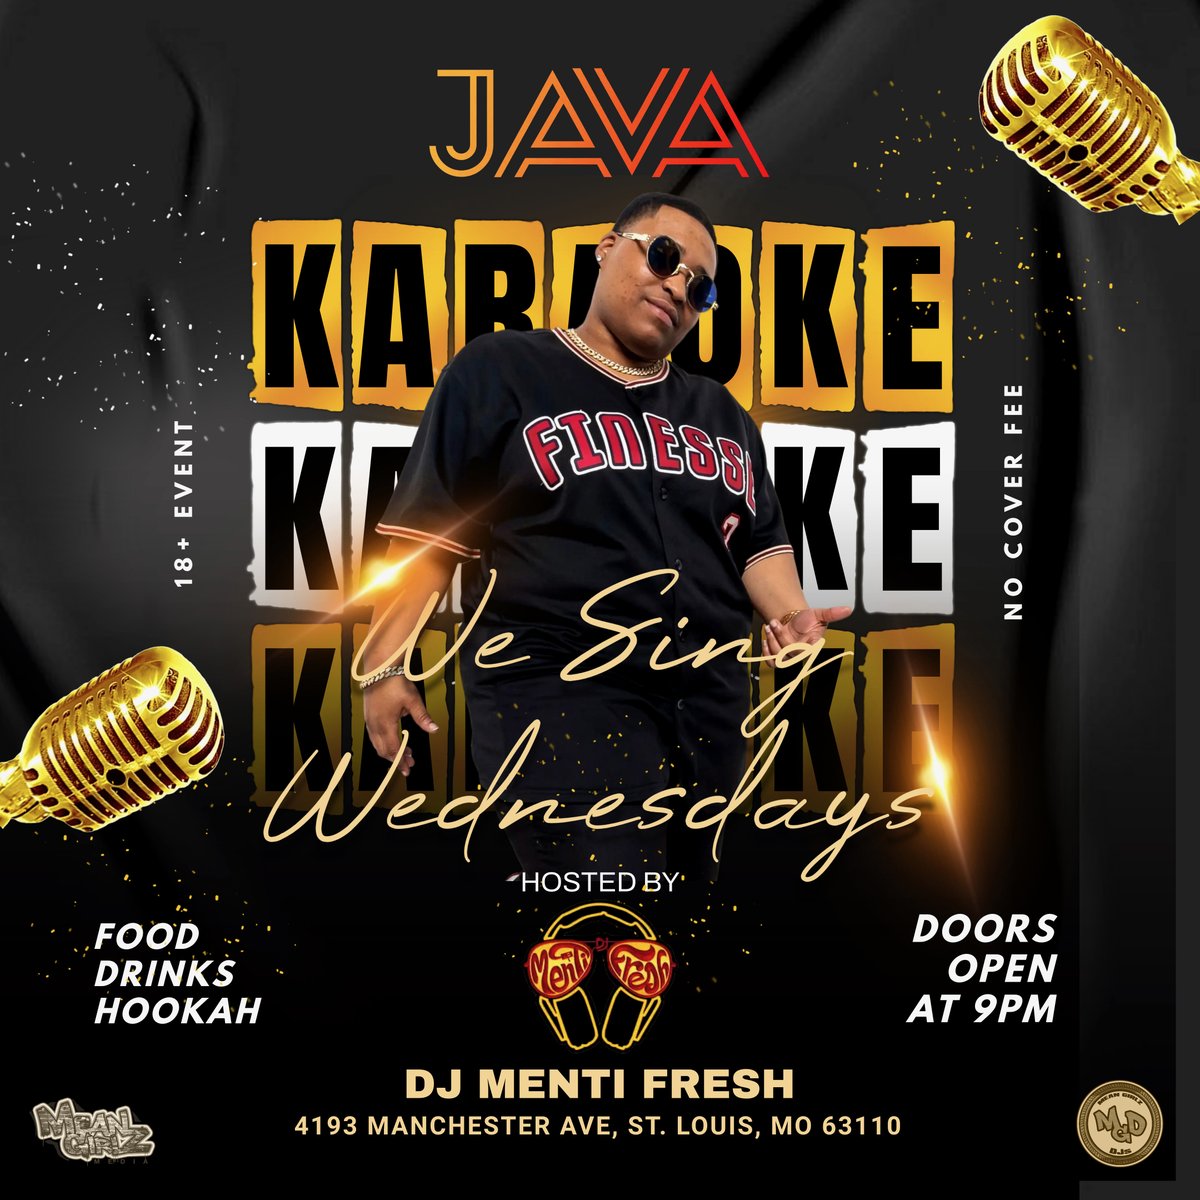 🎤 Get ready to belt out your favorite tunes because it's Wednesday, and that means karaoke night at JAVA! DJ Menti Fresh is ready to turn up the volume and keep the party going all night long. Let's sing our hearts out! #KaraokeNight #WeSingOnWednesdays